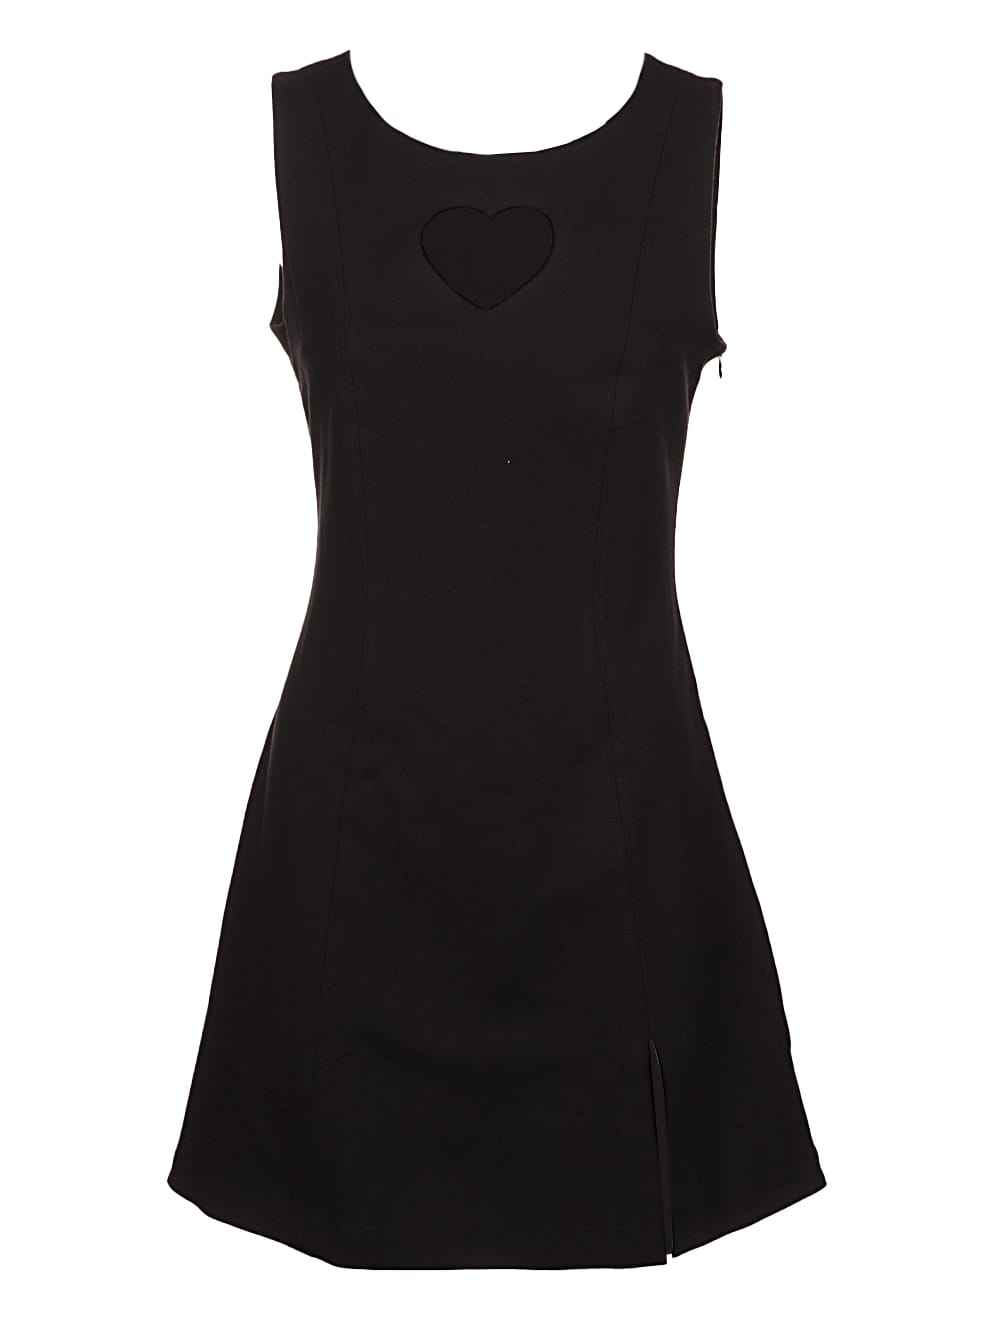 Paskal Sleeveless Dress With Heart Shaped Cut Outs | Coshio Online Shop